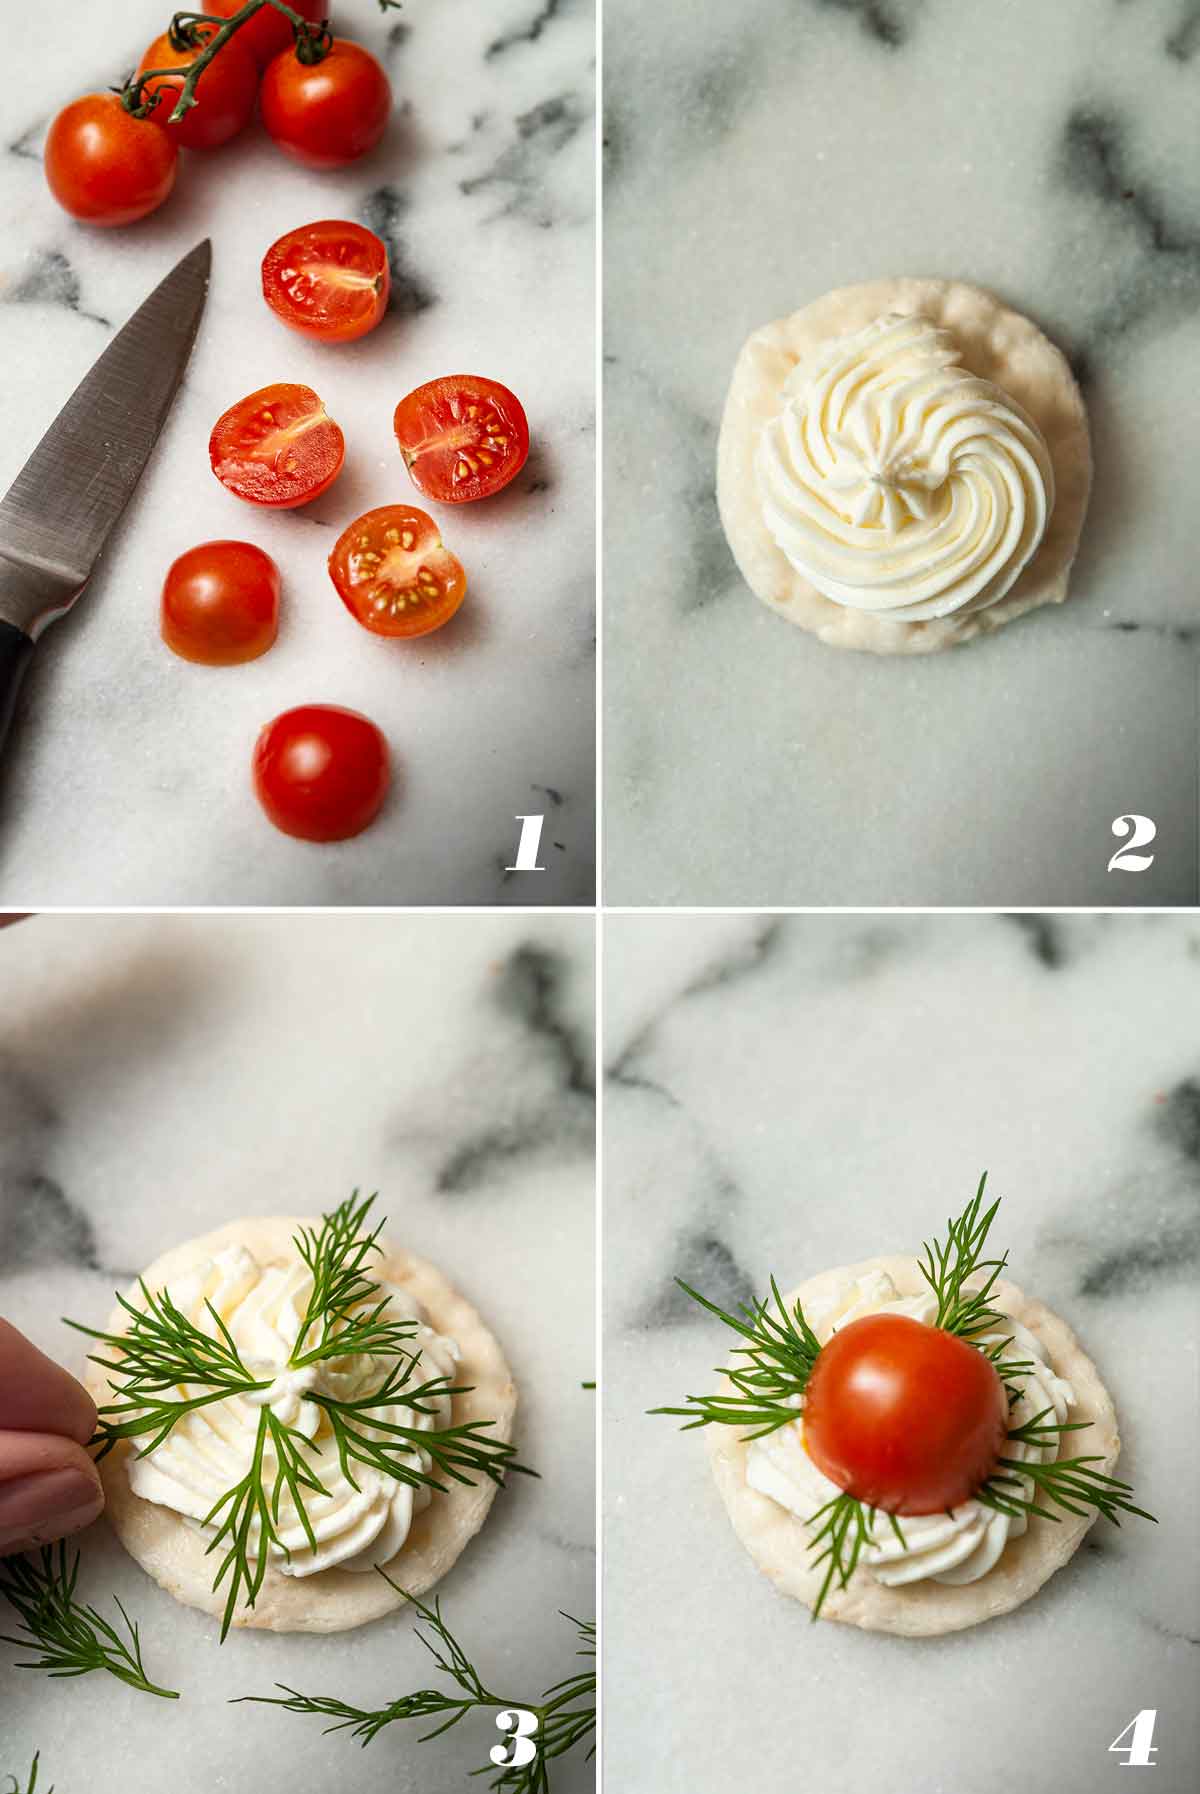 A collage of 4 numbered images showing how to prepare ingredients for appetizers.